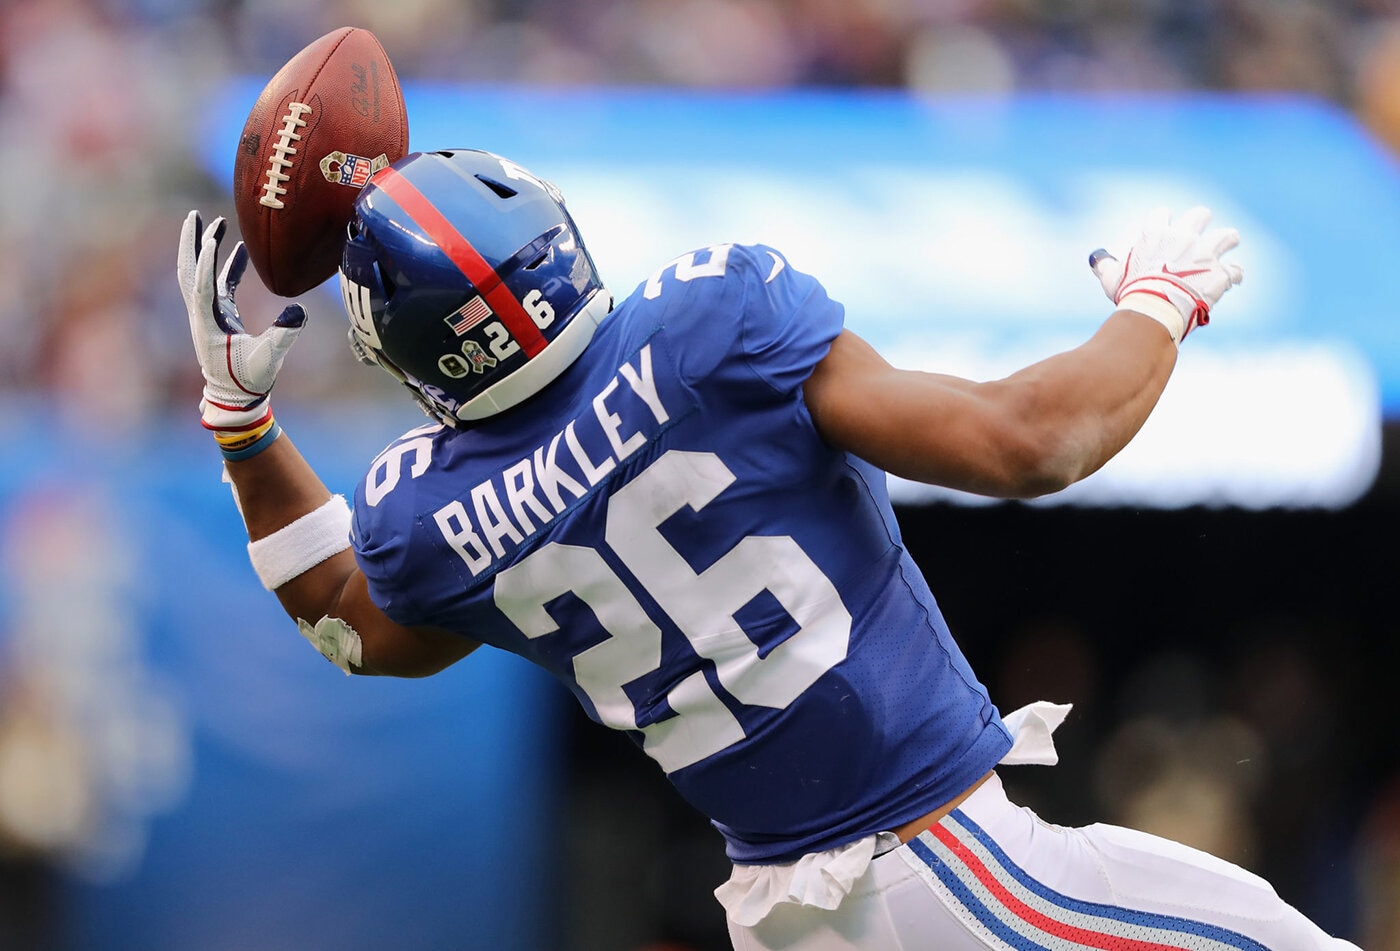 The New York Giants had an abysmal season opener against the Pittsburgh Steelers, and the stats are pointing out Saquon Barkley is the weak link.